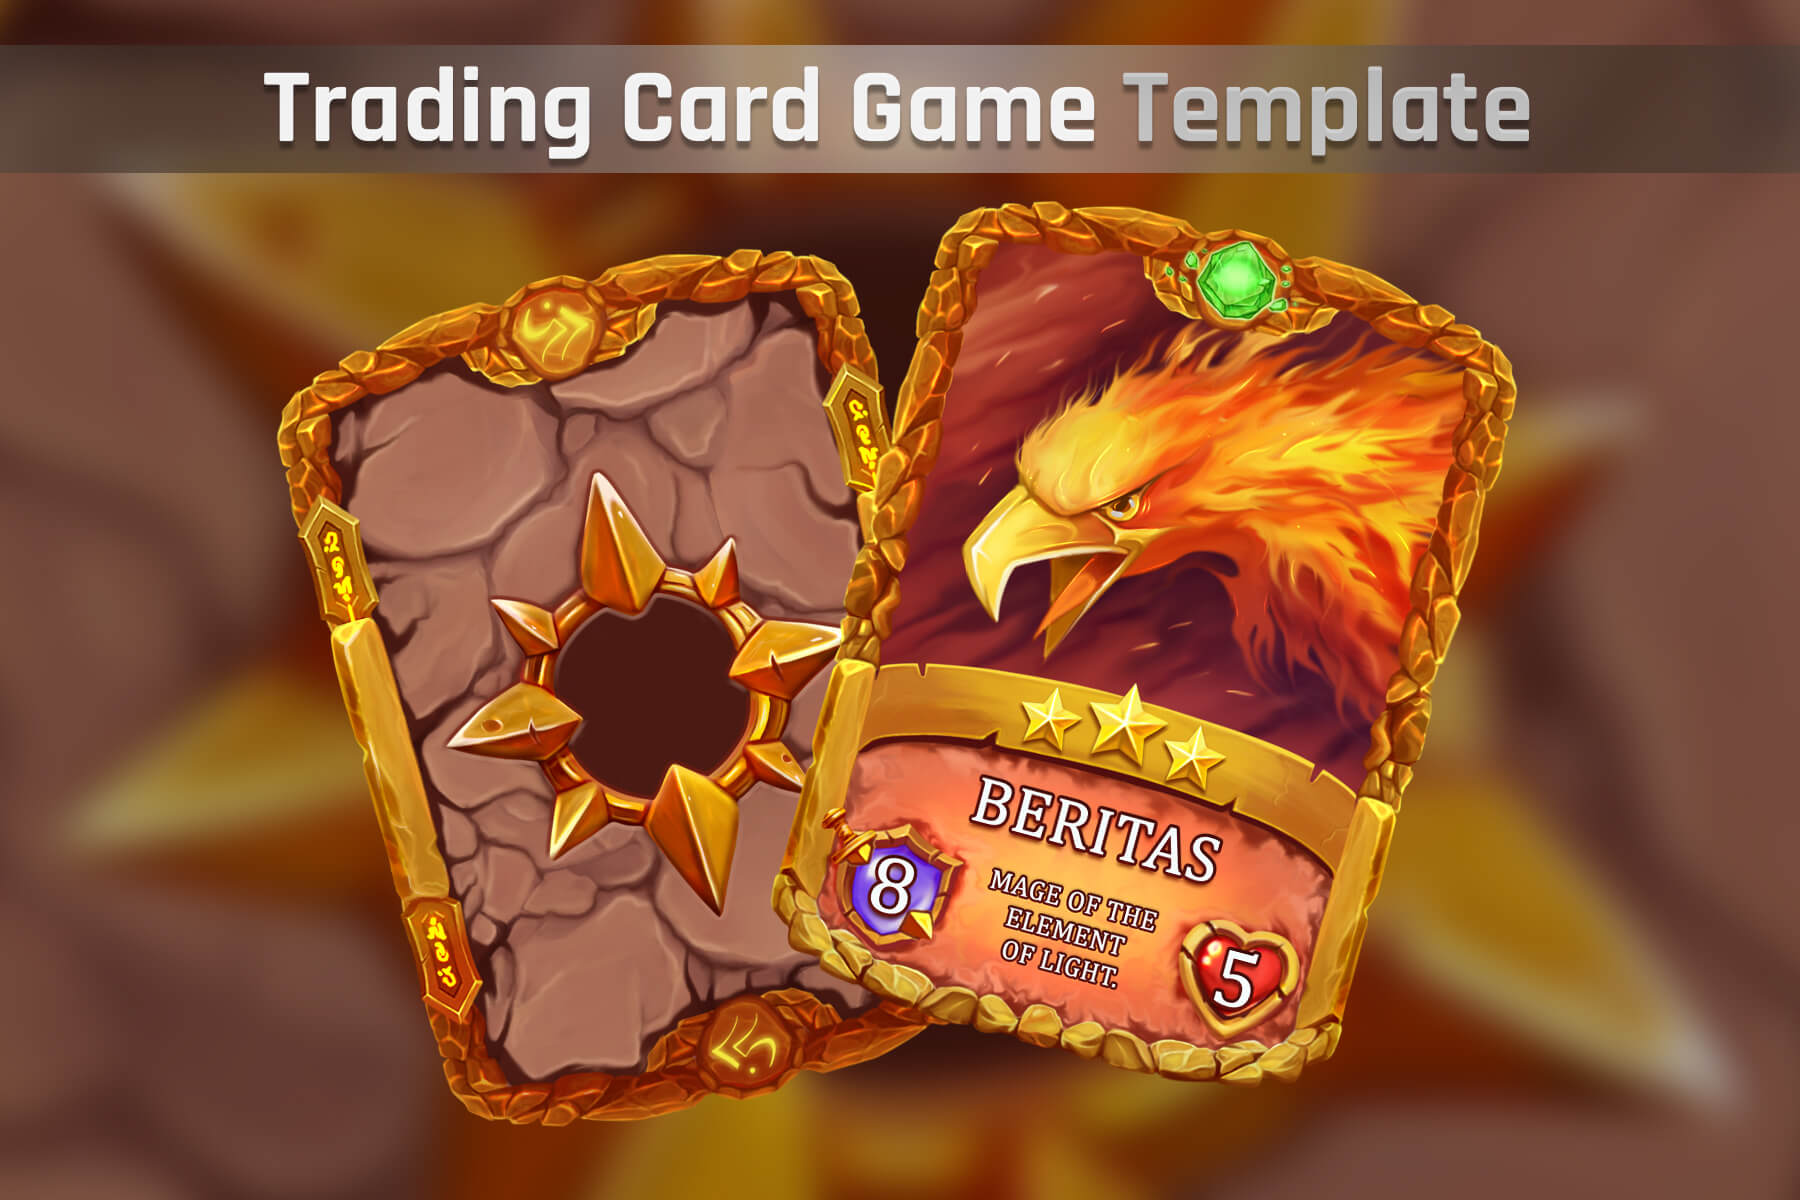 TCG Template PSD Download - CraftPix.net In Trading Cards Templates Free Download